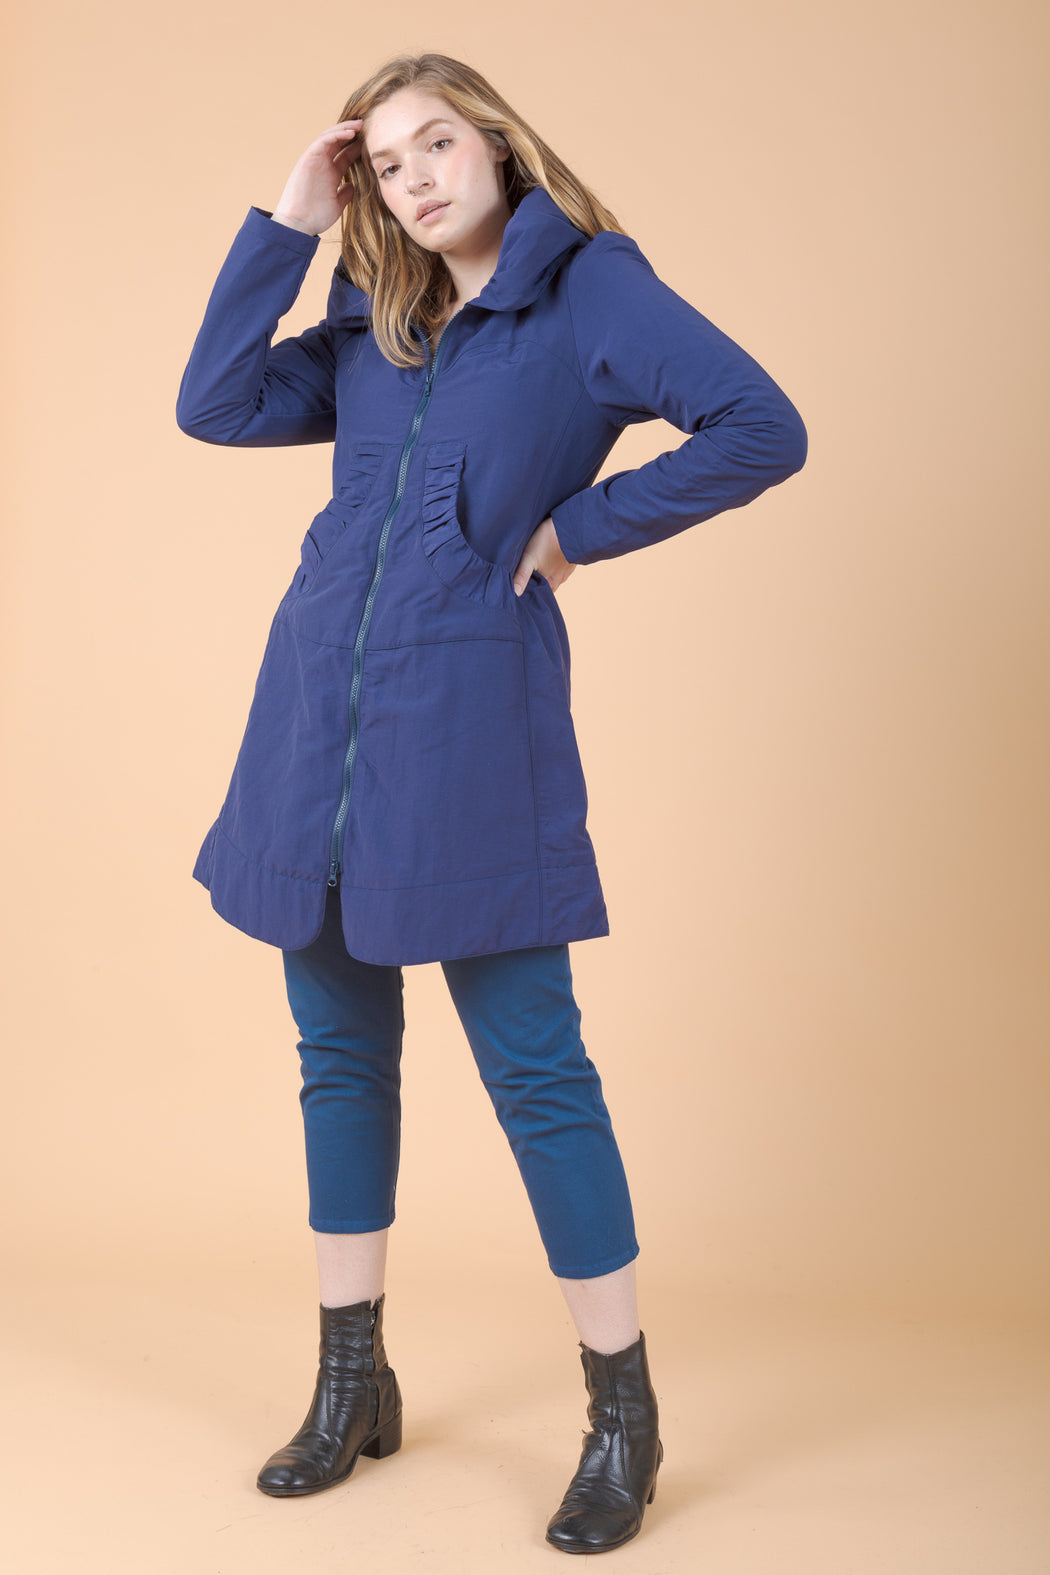 Prairie Underground Long Raincloak in Paris Blue. a Victorian-style Raincoat with a romantic, billowing hood and soft cotton lining.